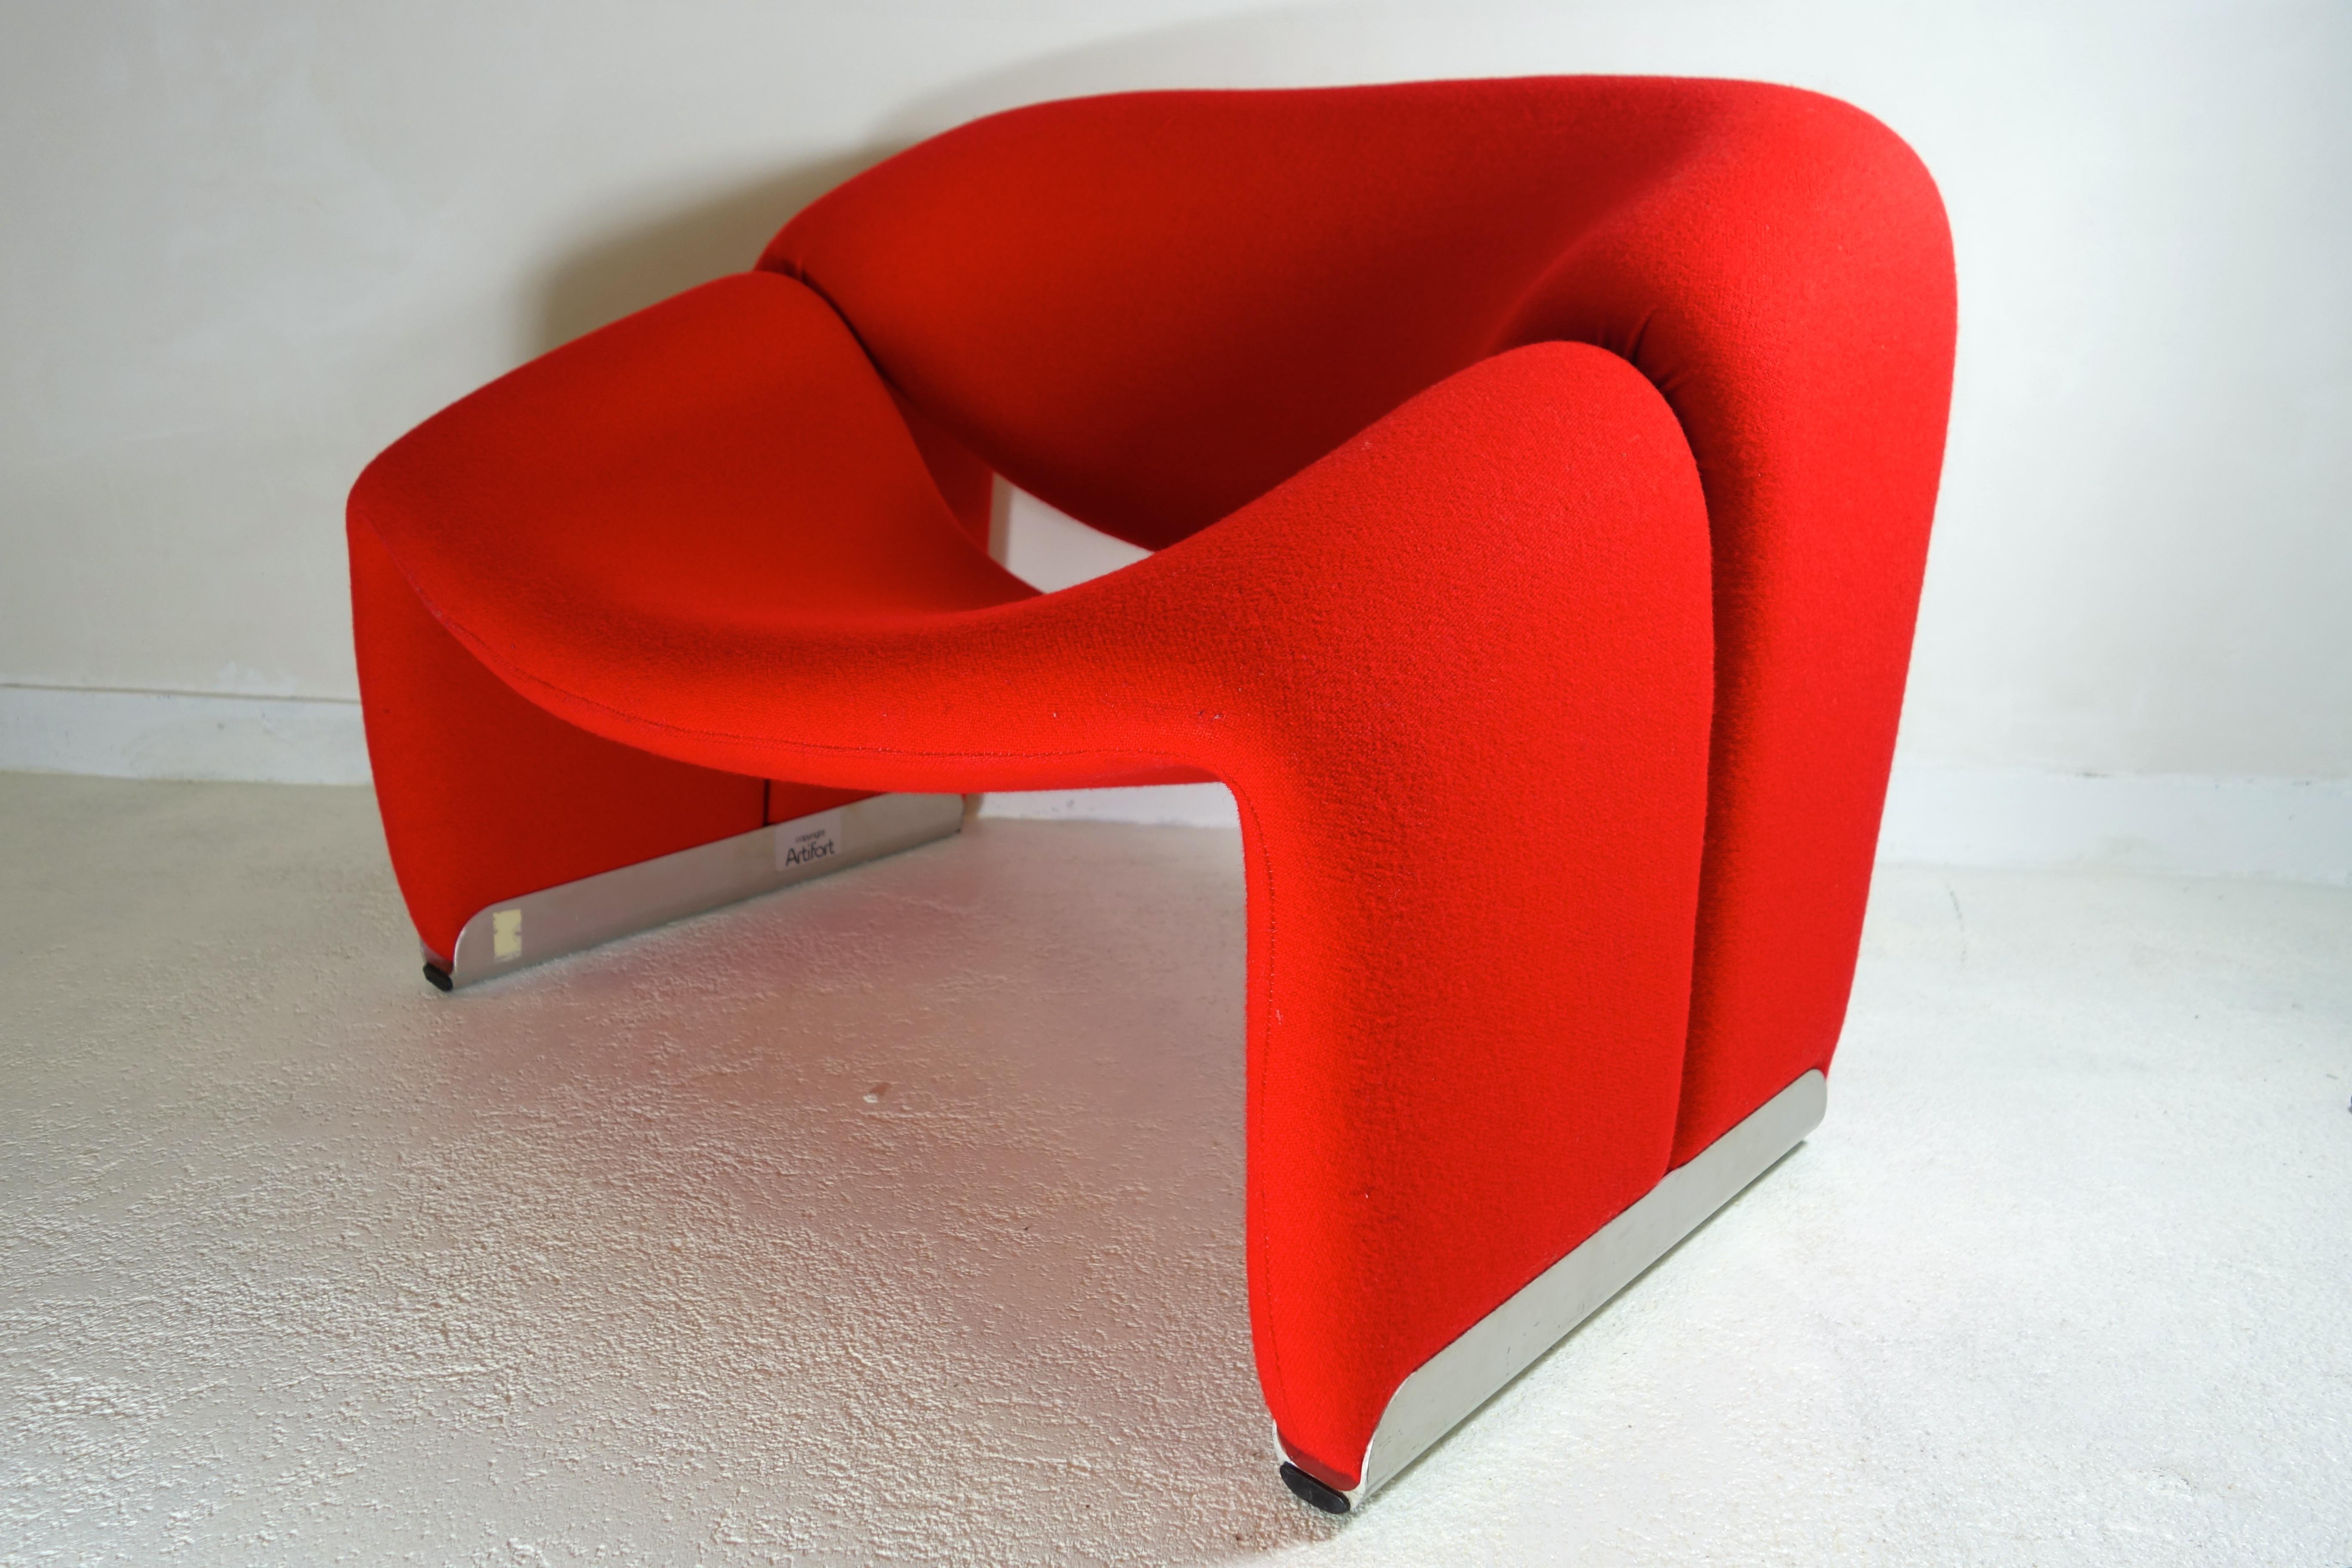 The Groovy chair, or F598, was designed in 1973 by France's top designer Pierre Paulin for Holland's most Avant Garde furniture maker Artifort. Their compactness combined with great comfort and of course iconic looks made this chair one of the stars